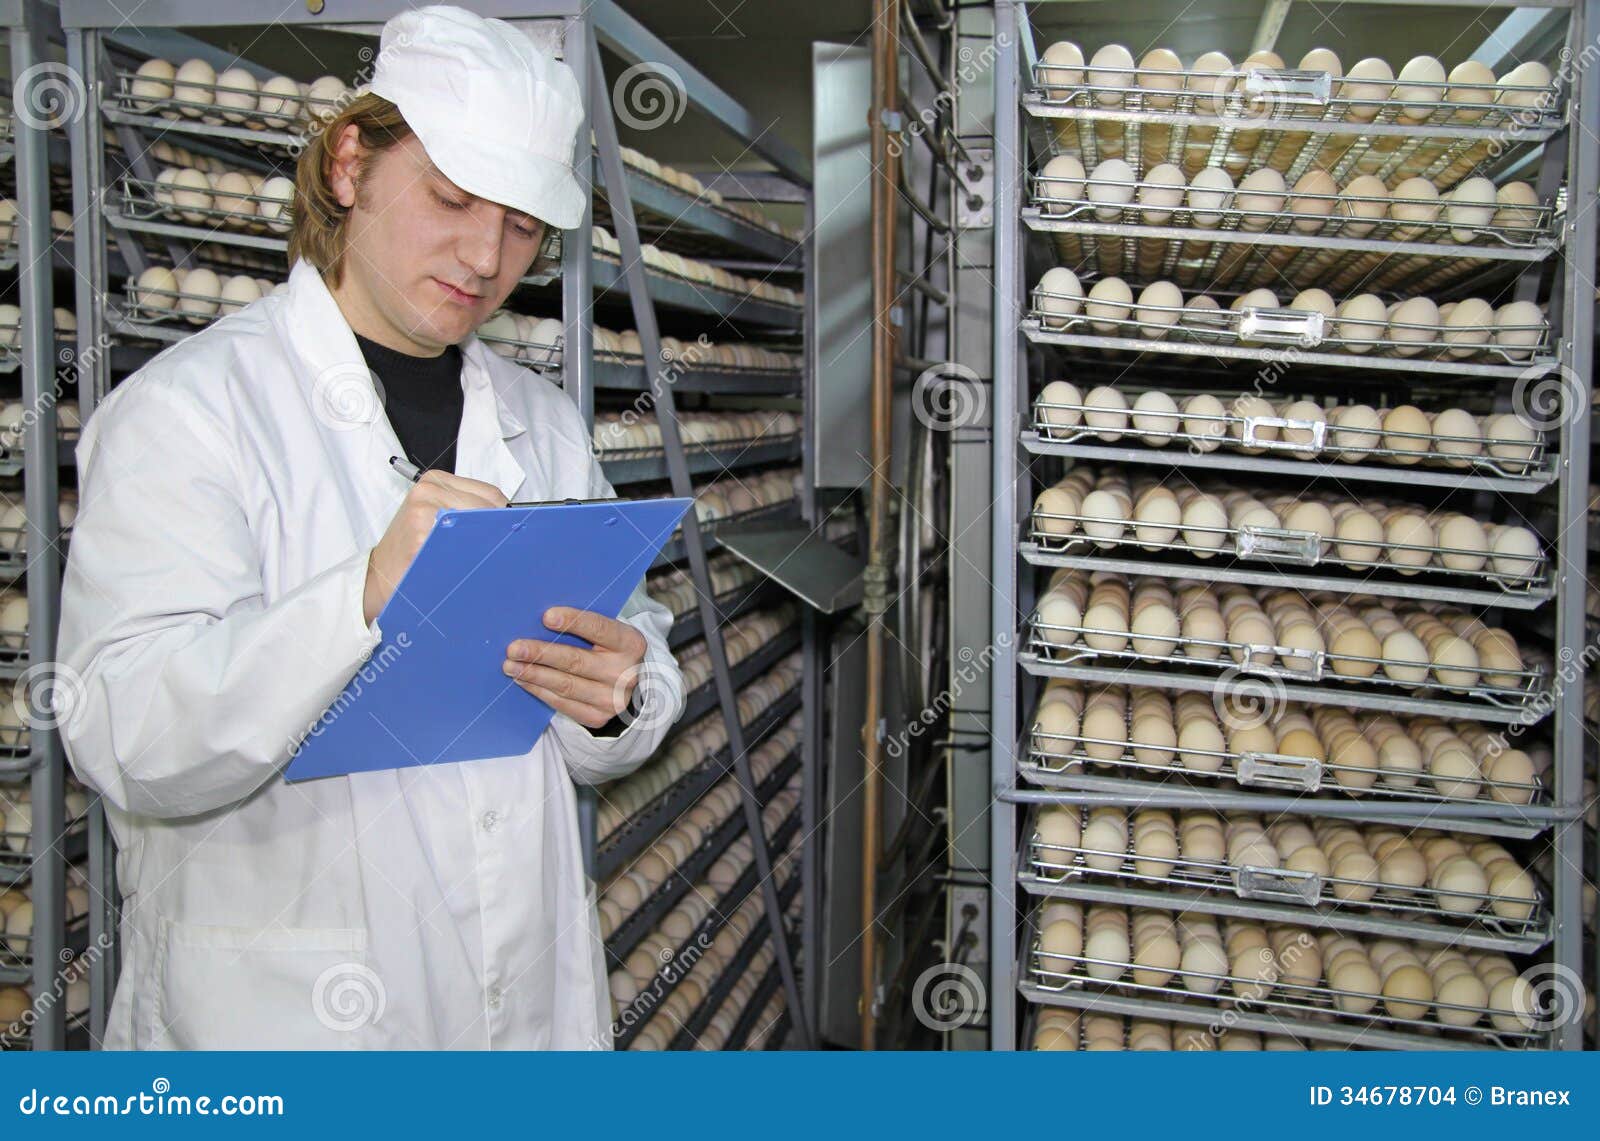 Chicken Eggs In Incubator Stock Images - Image: 34678704